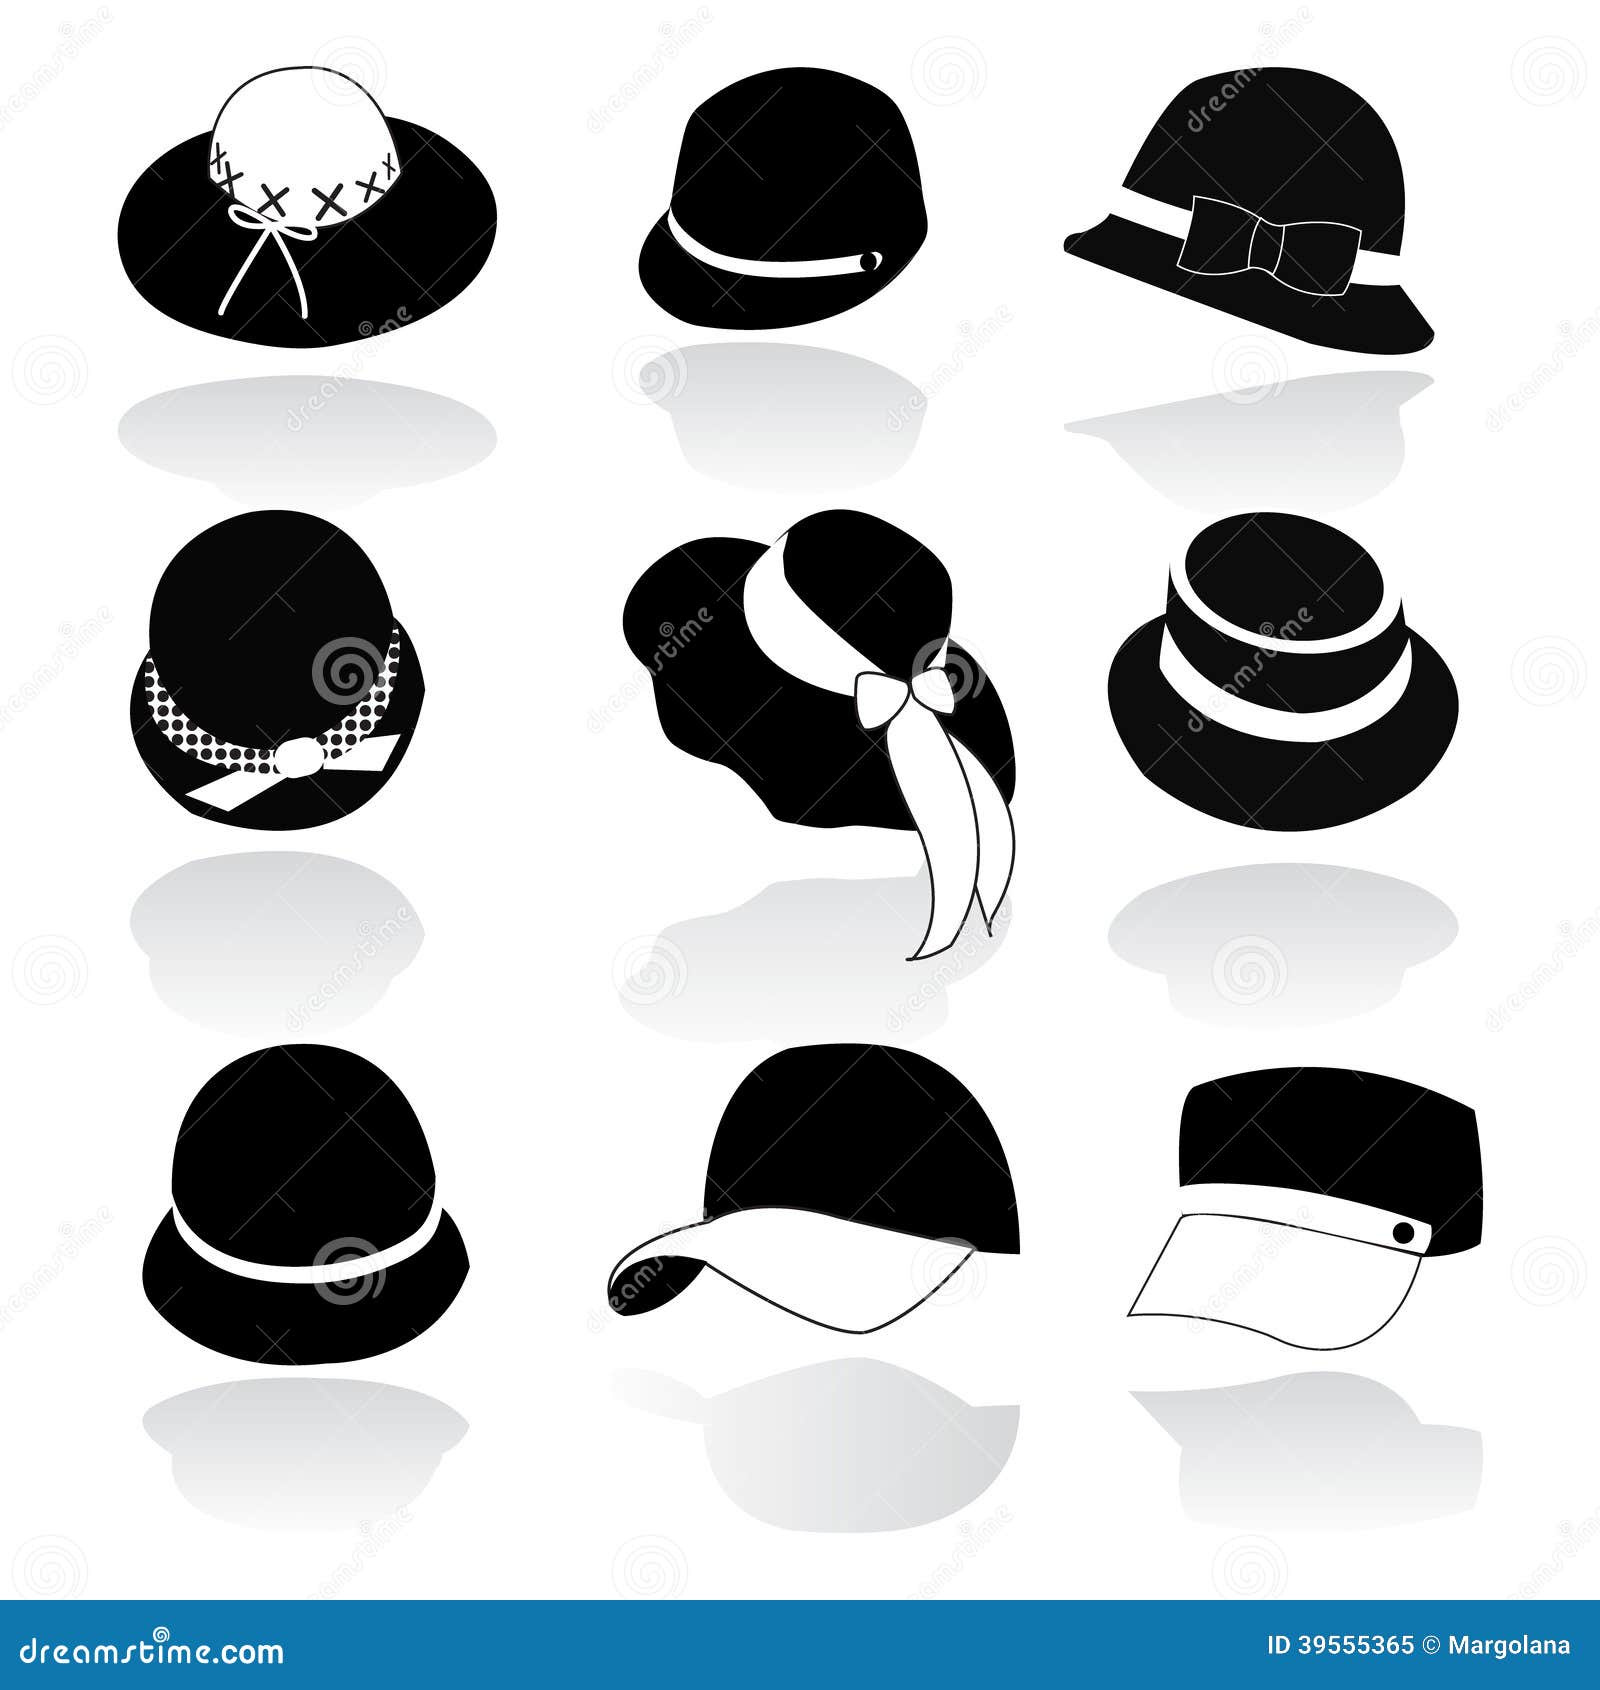 Icon Set Of Hats Black Silhouette Stock Vector